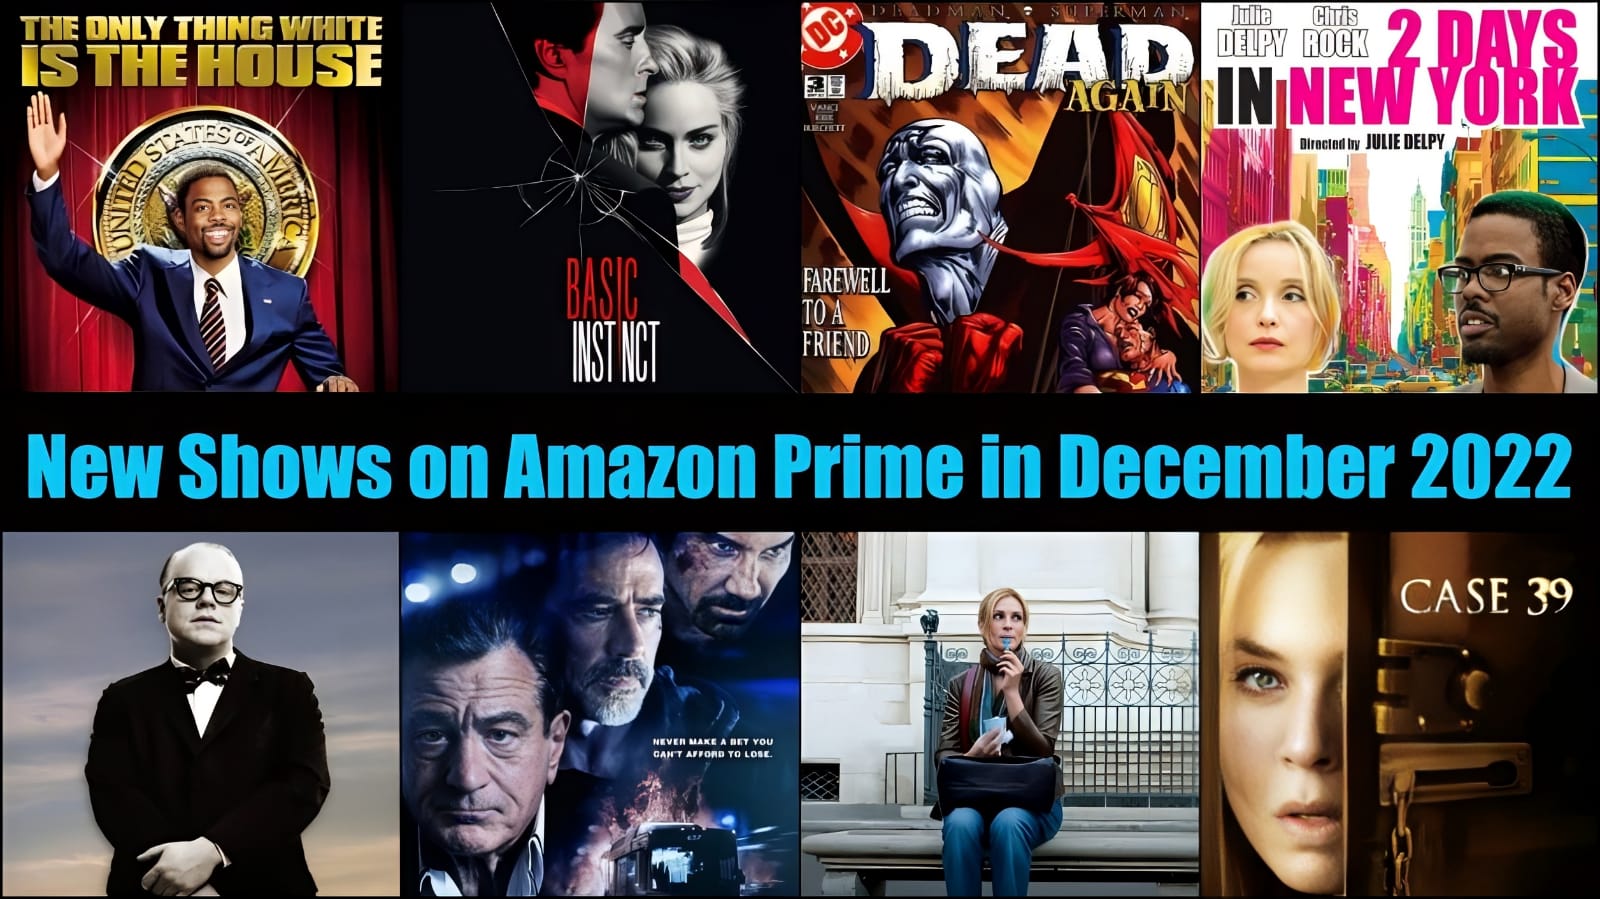 New shows on Amazon Prime in December 2022